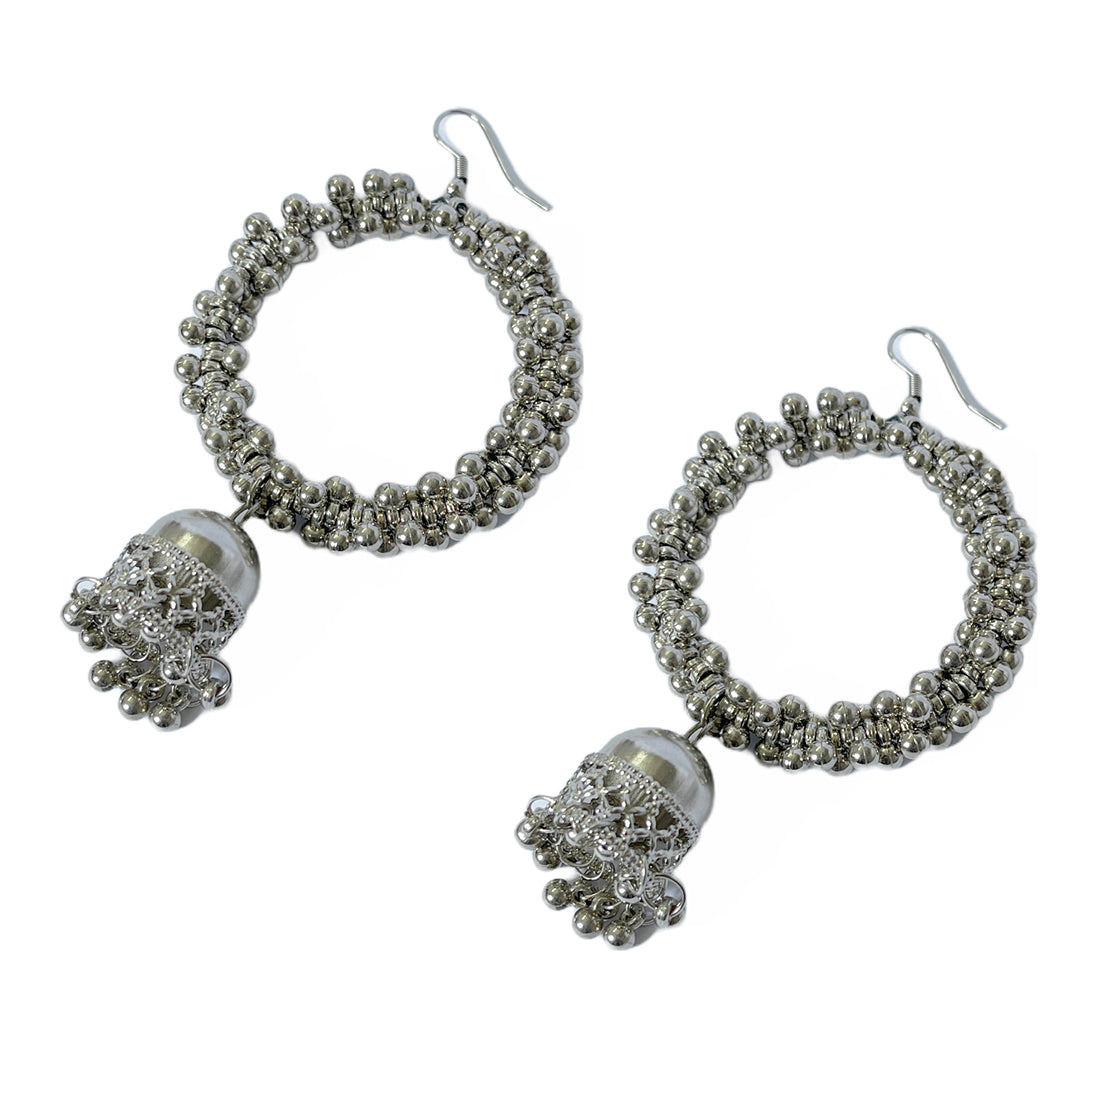 Oversized Handcrafted Ethnic Silver-Toned Ghungroo Circular Jhumki Drop Earrings